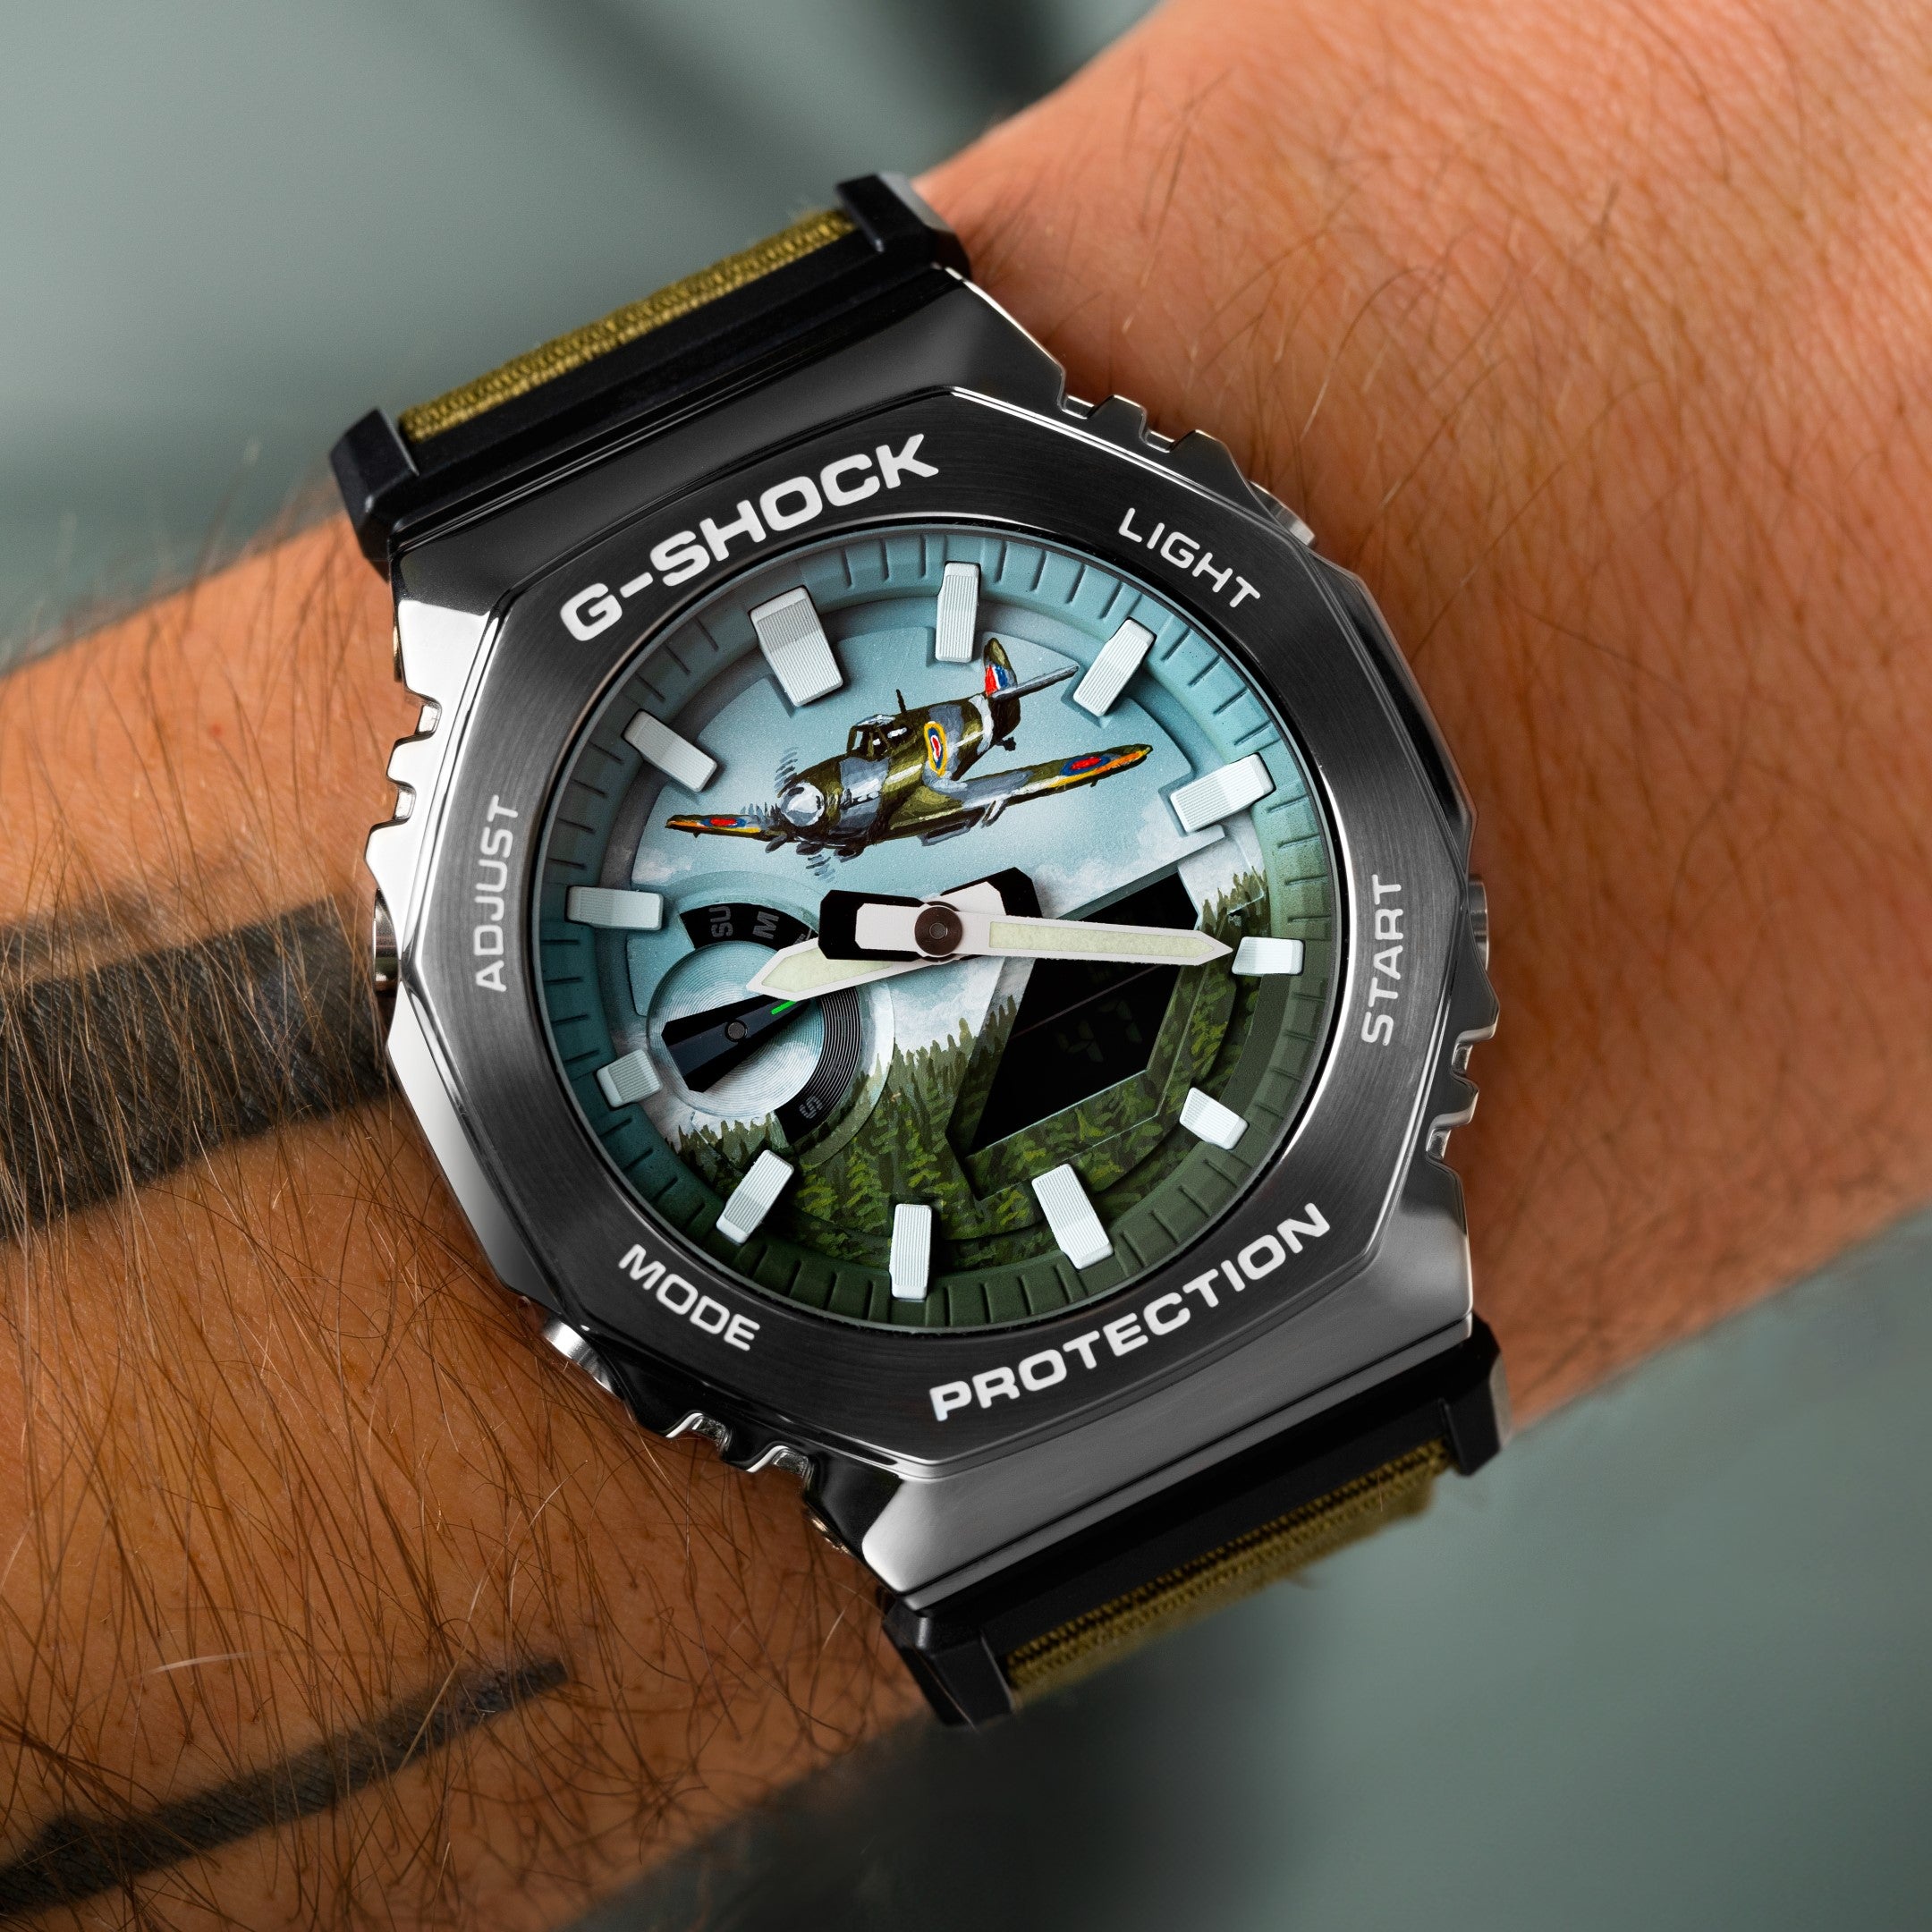 G-Shock CasiOak Spitfire limited edition watch hand-painted dial aviation-inspired design